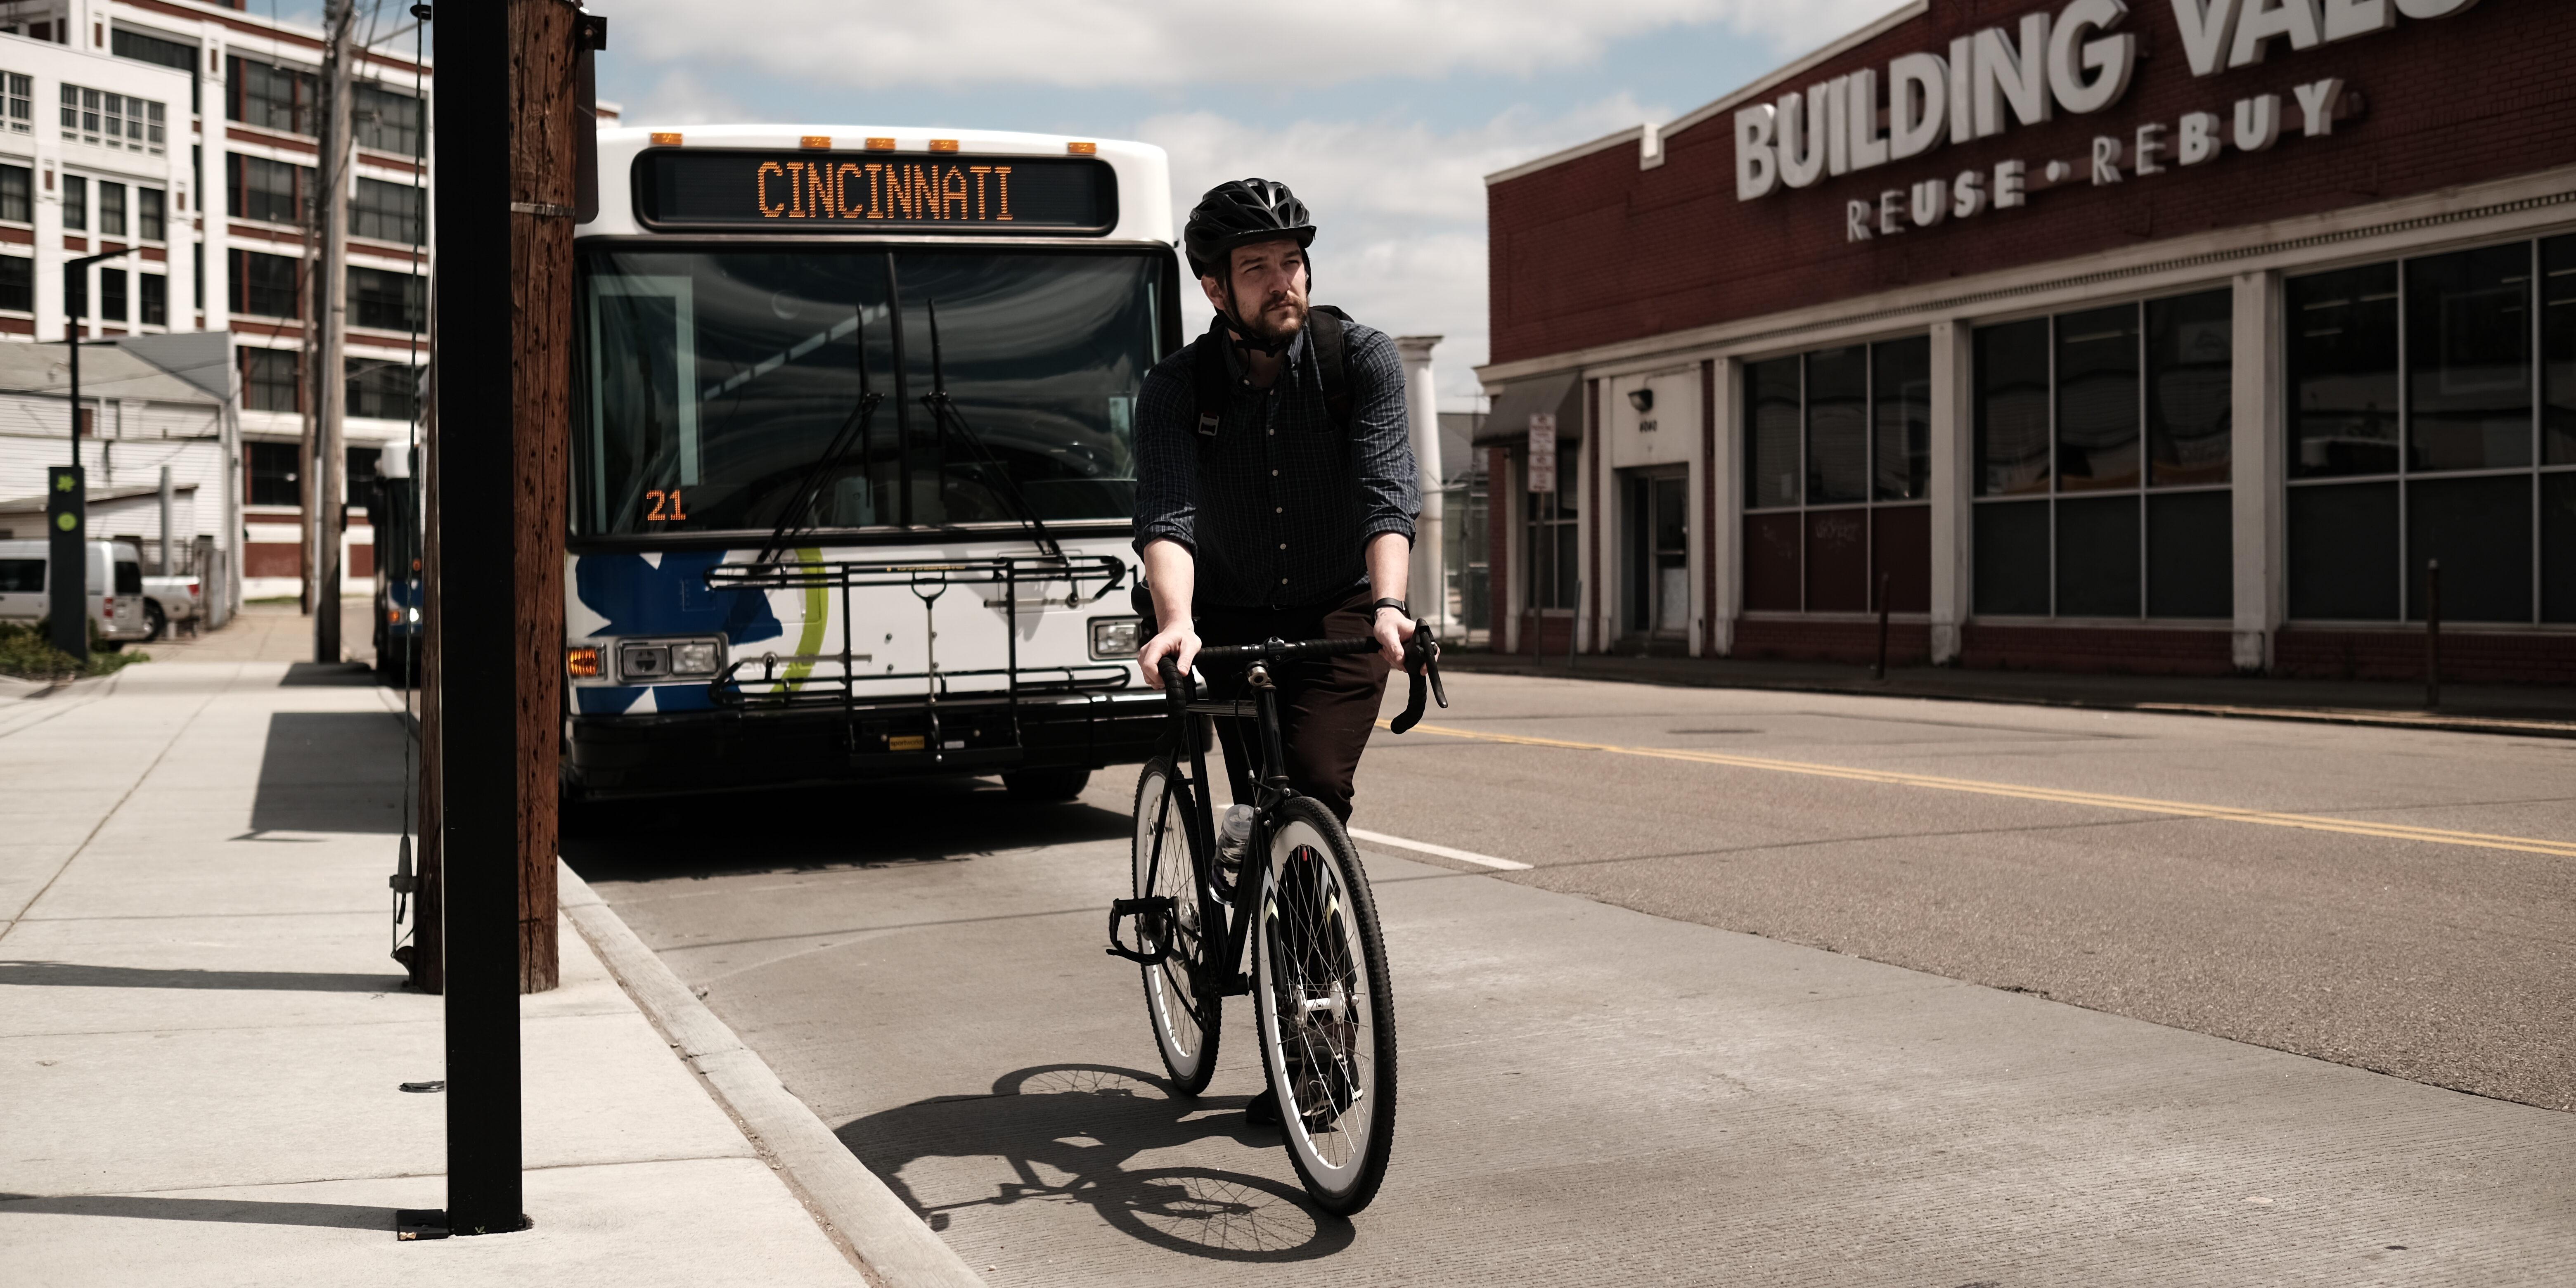 Bike and Bus with Metro